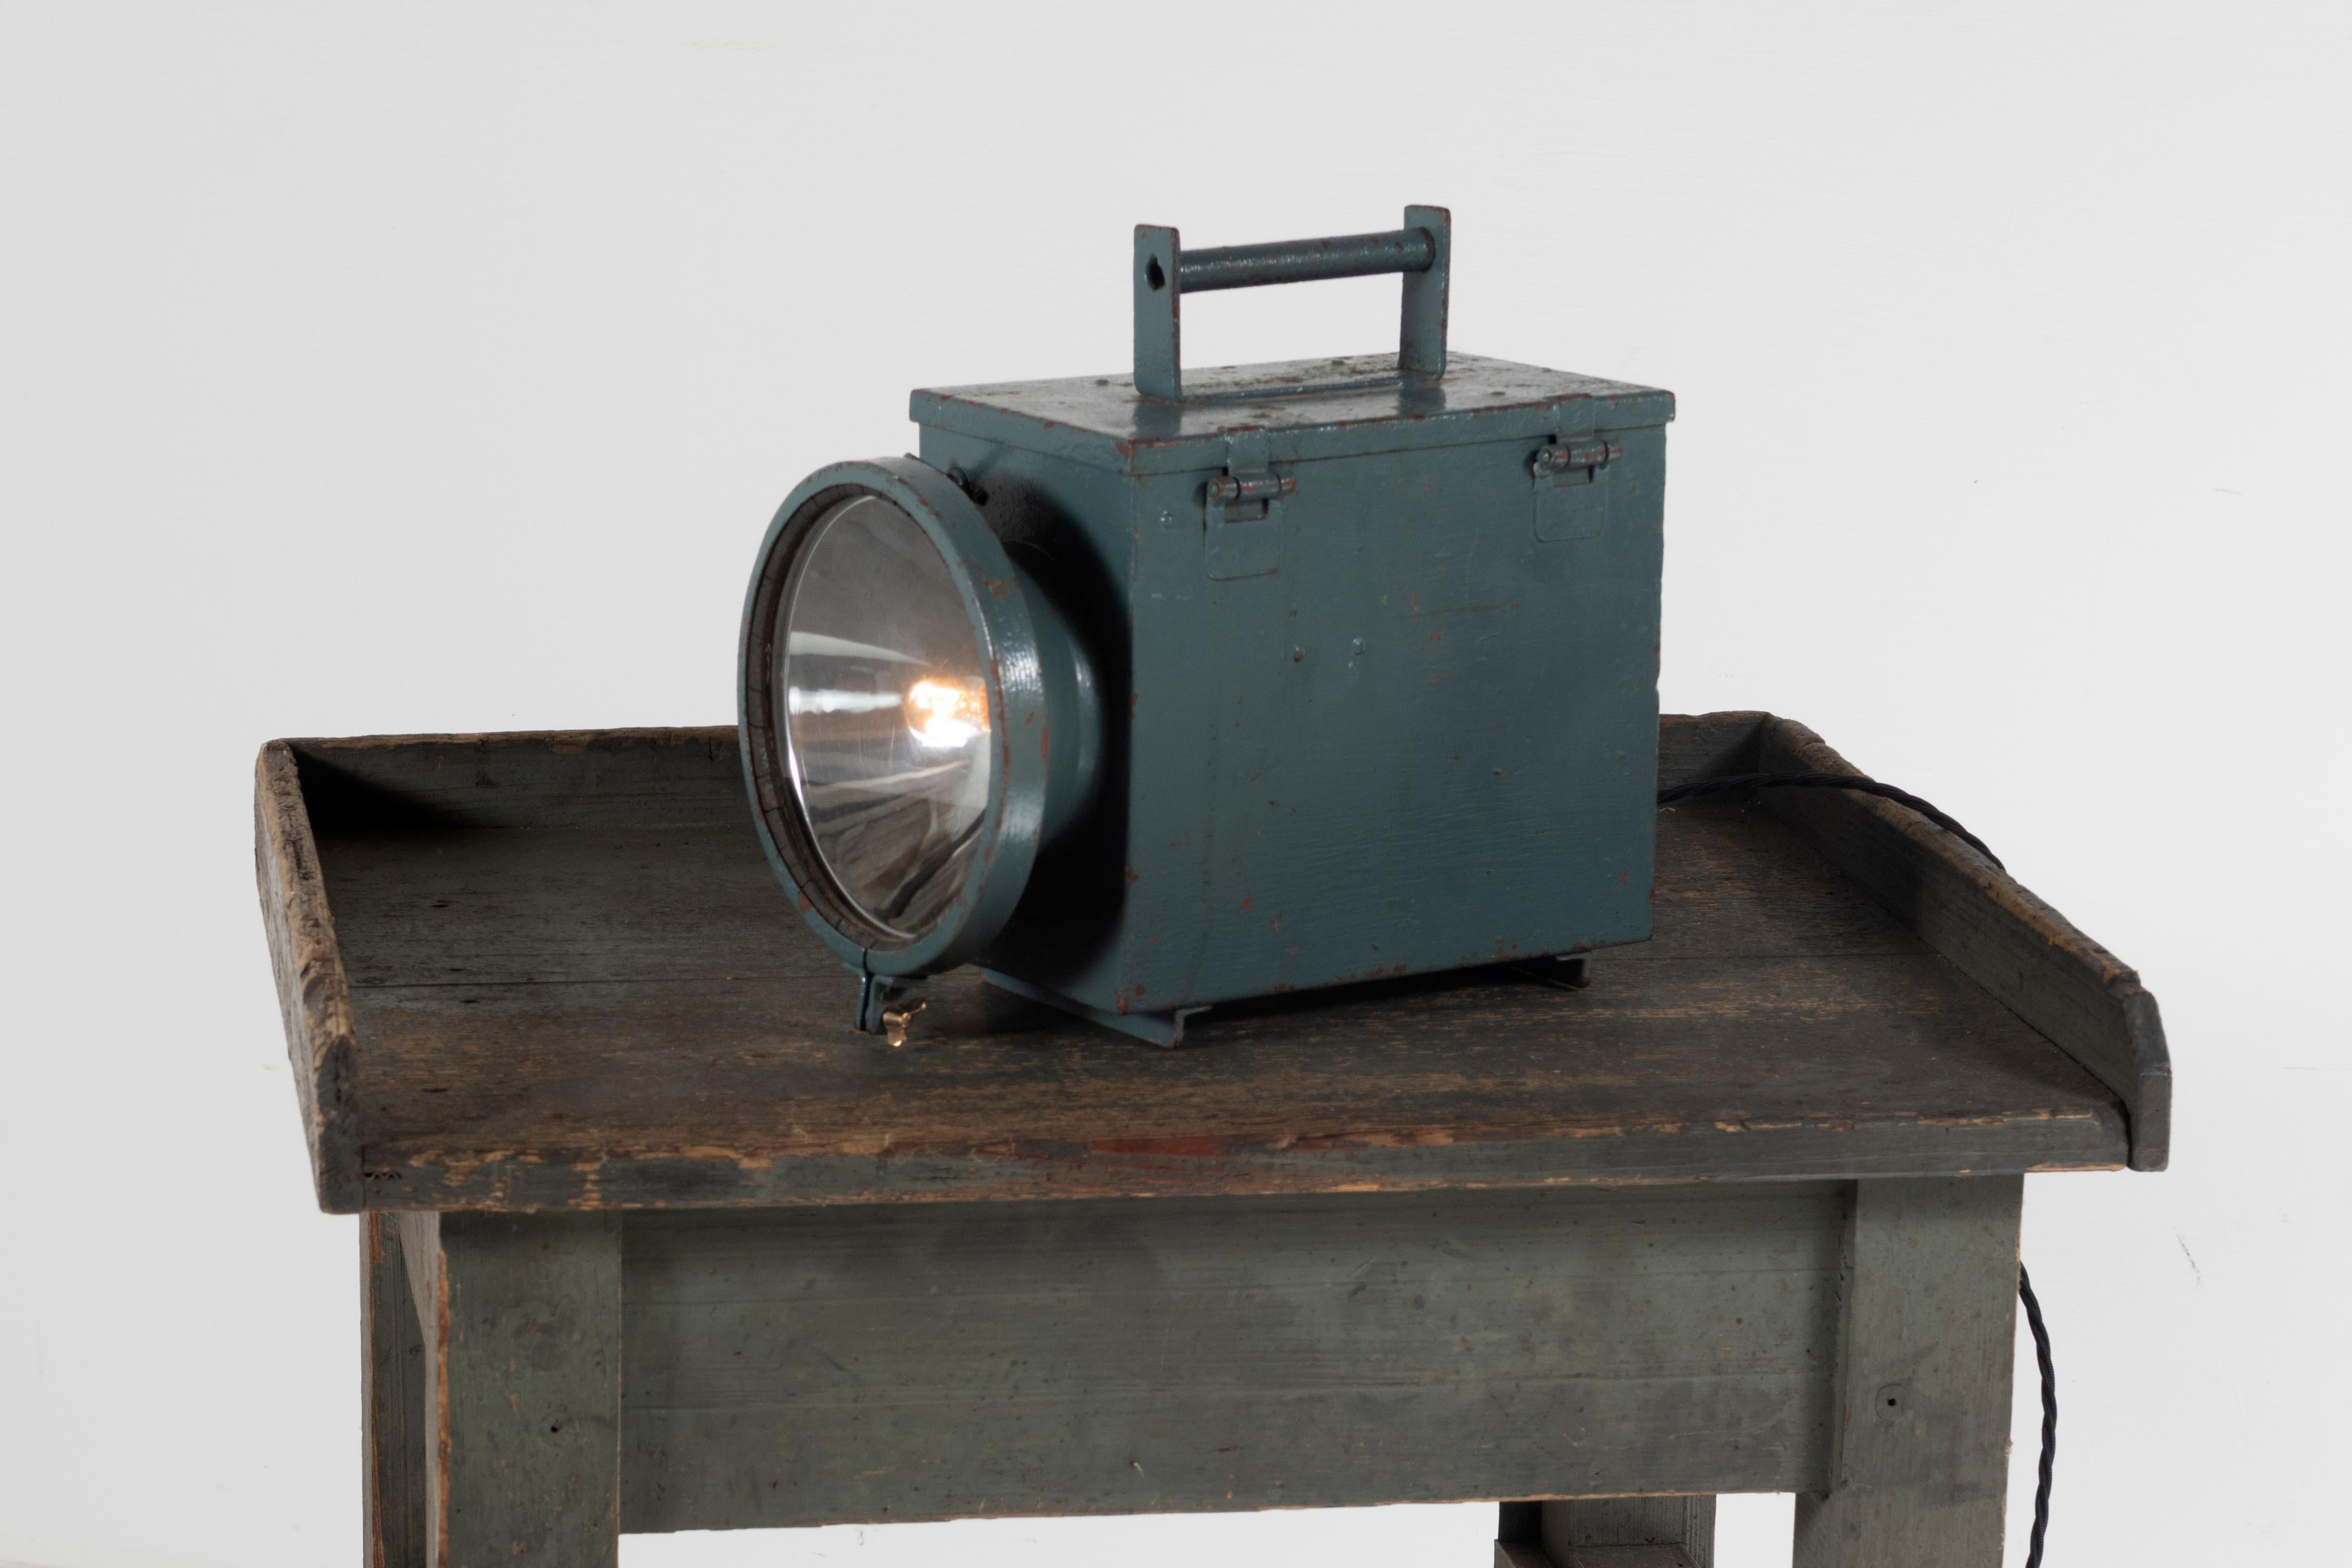 An old industrial battery torch light, probably a military lamp. In a great colour and now fully re-wired. The original battery lamp retains its original makers mark G.E.C. General Electric Company and from the label, this can be dated to circa